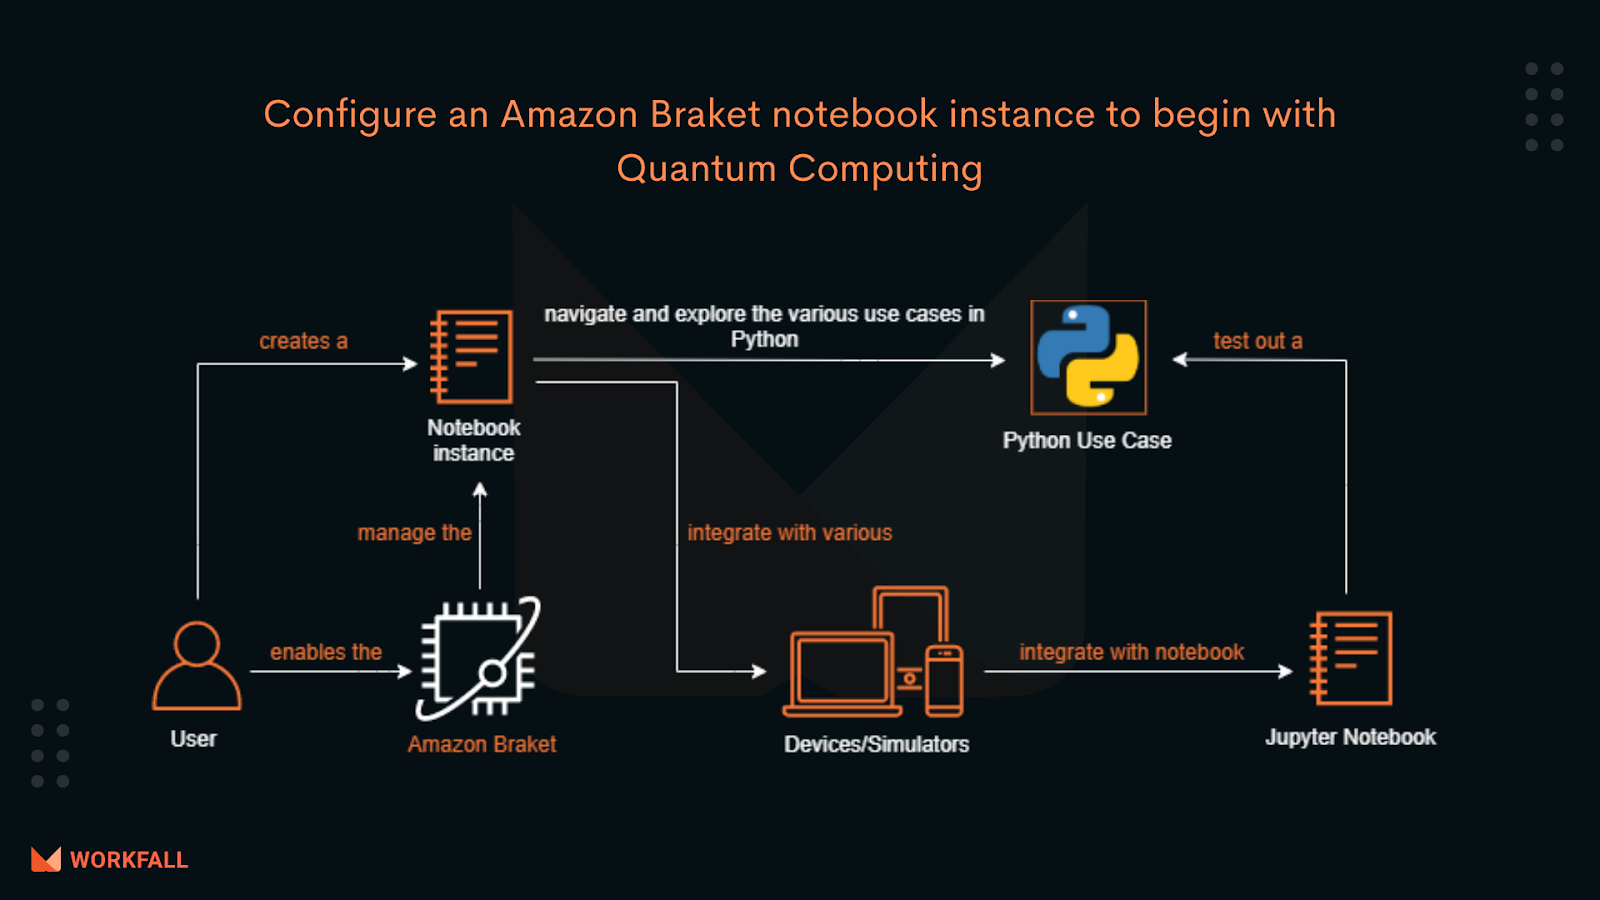 How to configure an Amazon Braket notebook instance to begin with Quantum Computing?